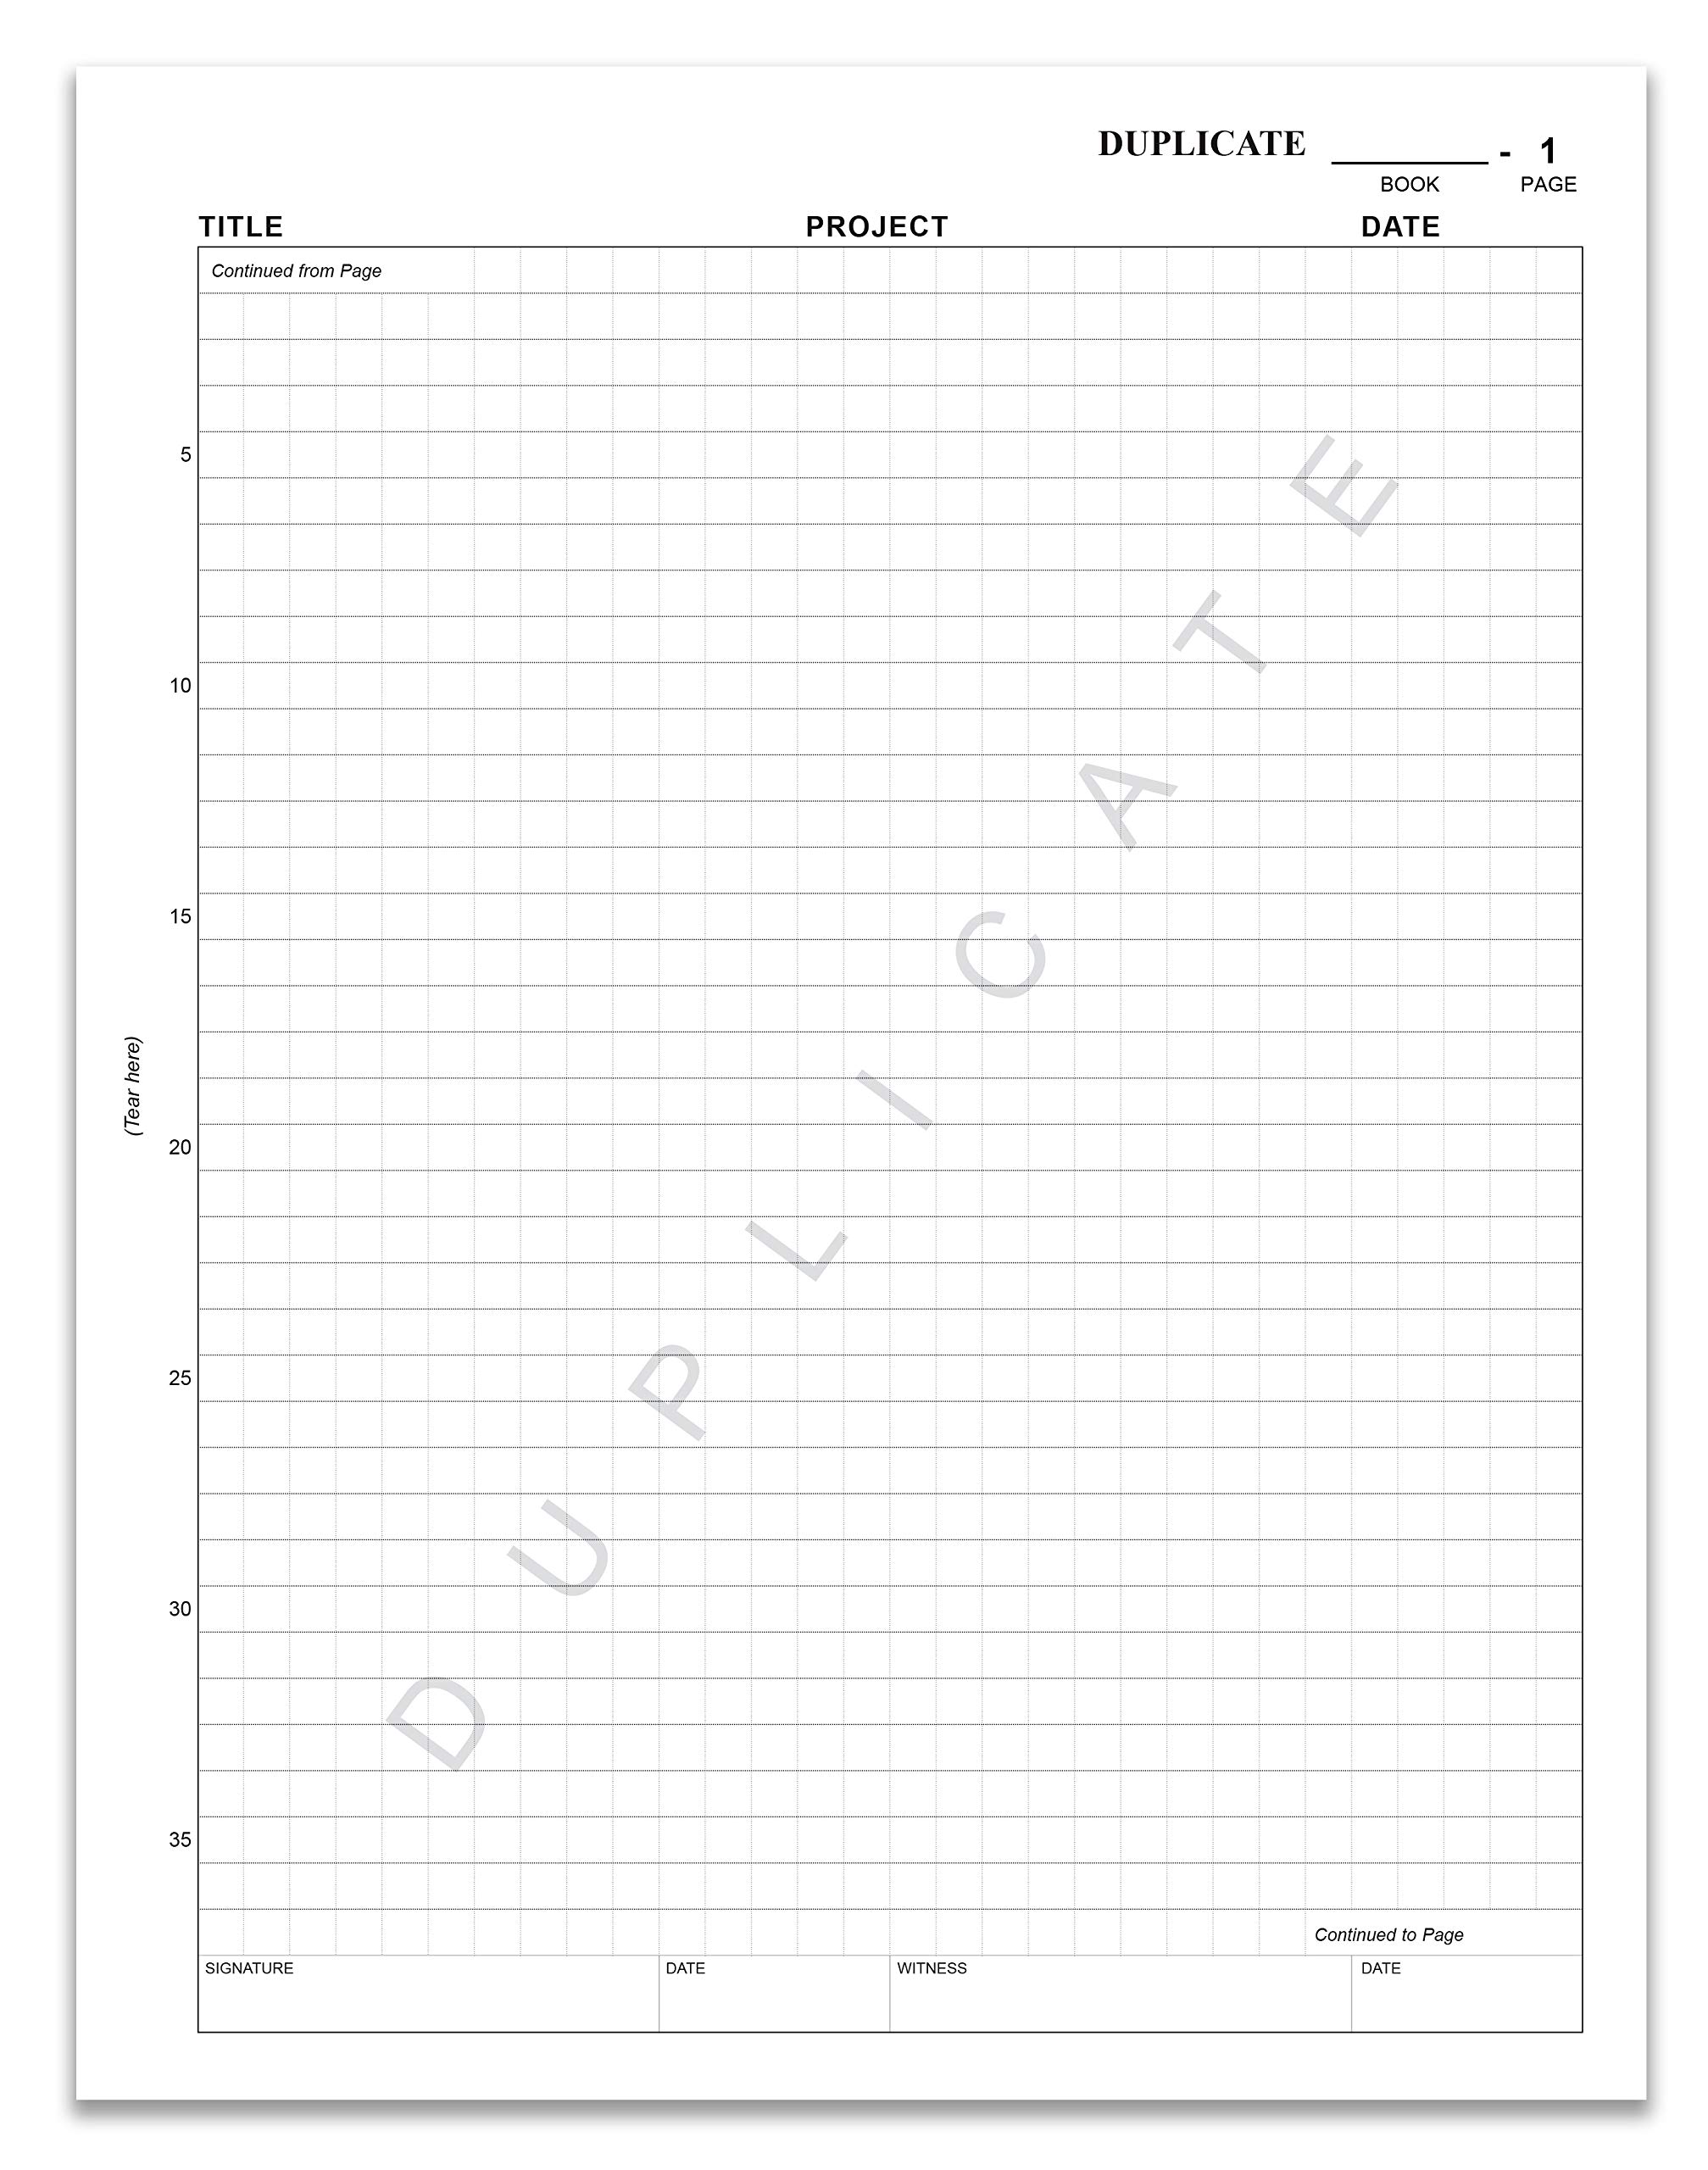 BookFactory Carbonless Student Lab Notebook - 50 Sets of Pages (8.5" X 11") (Duplicator) - Scientific Grid Pages, Durable Translucent Cover, Wire-O Binding (LAB-050-7GW-D (Student))